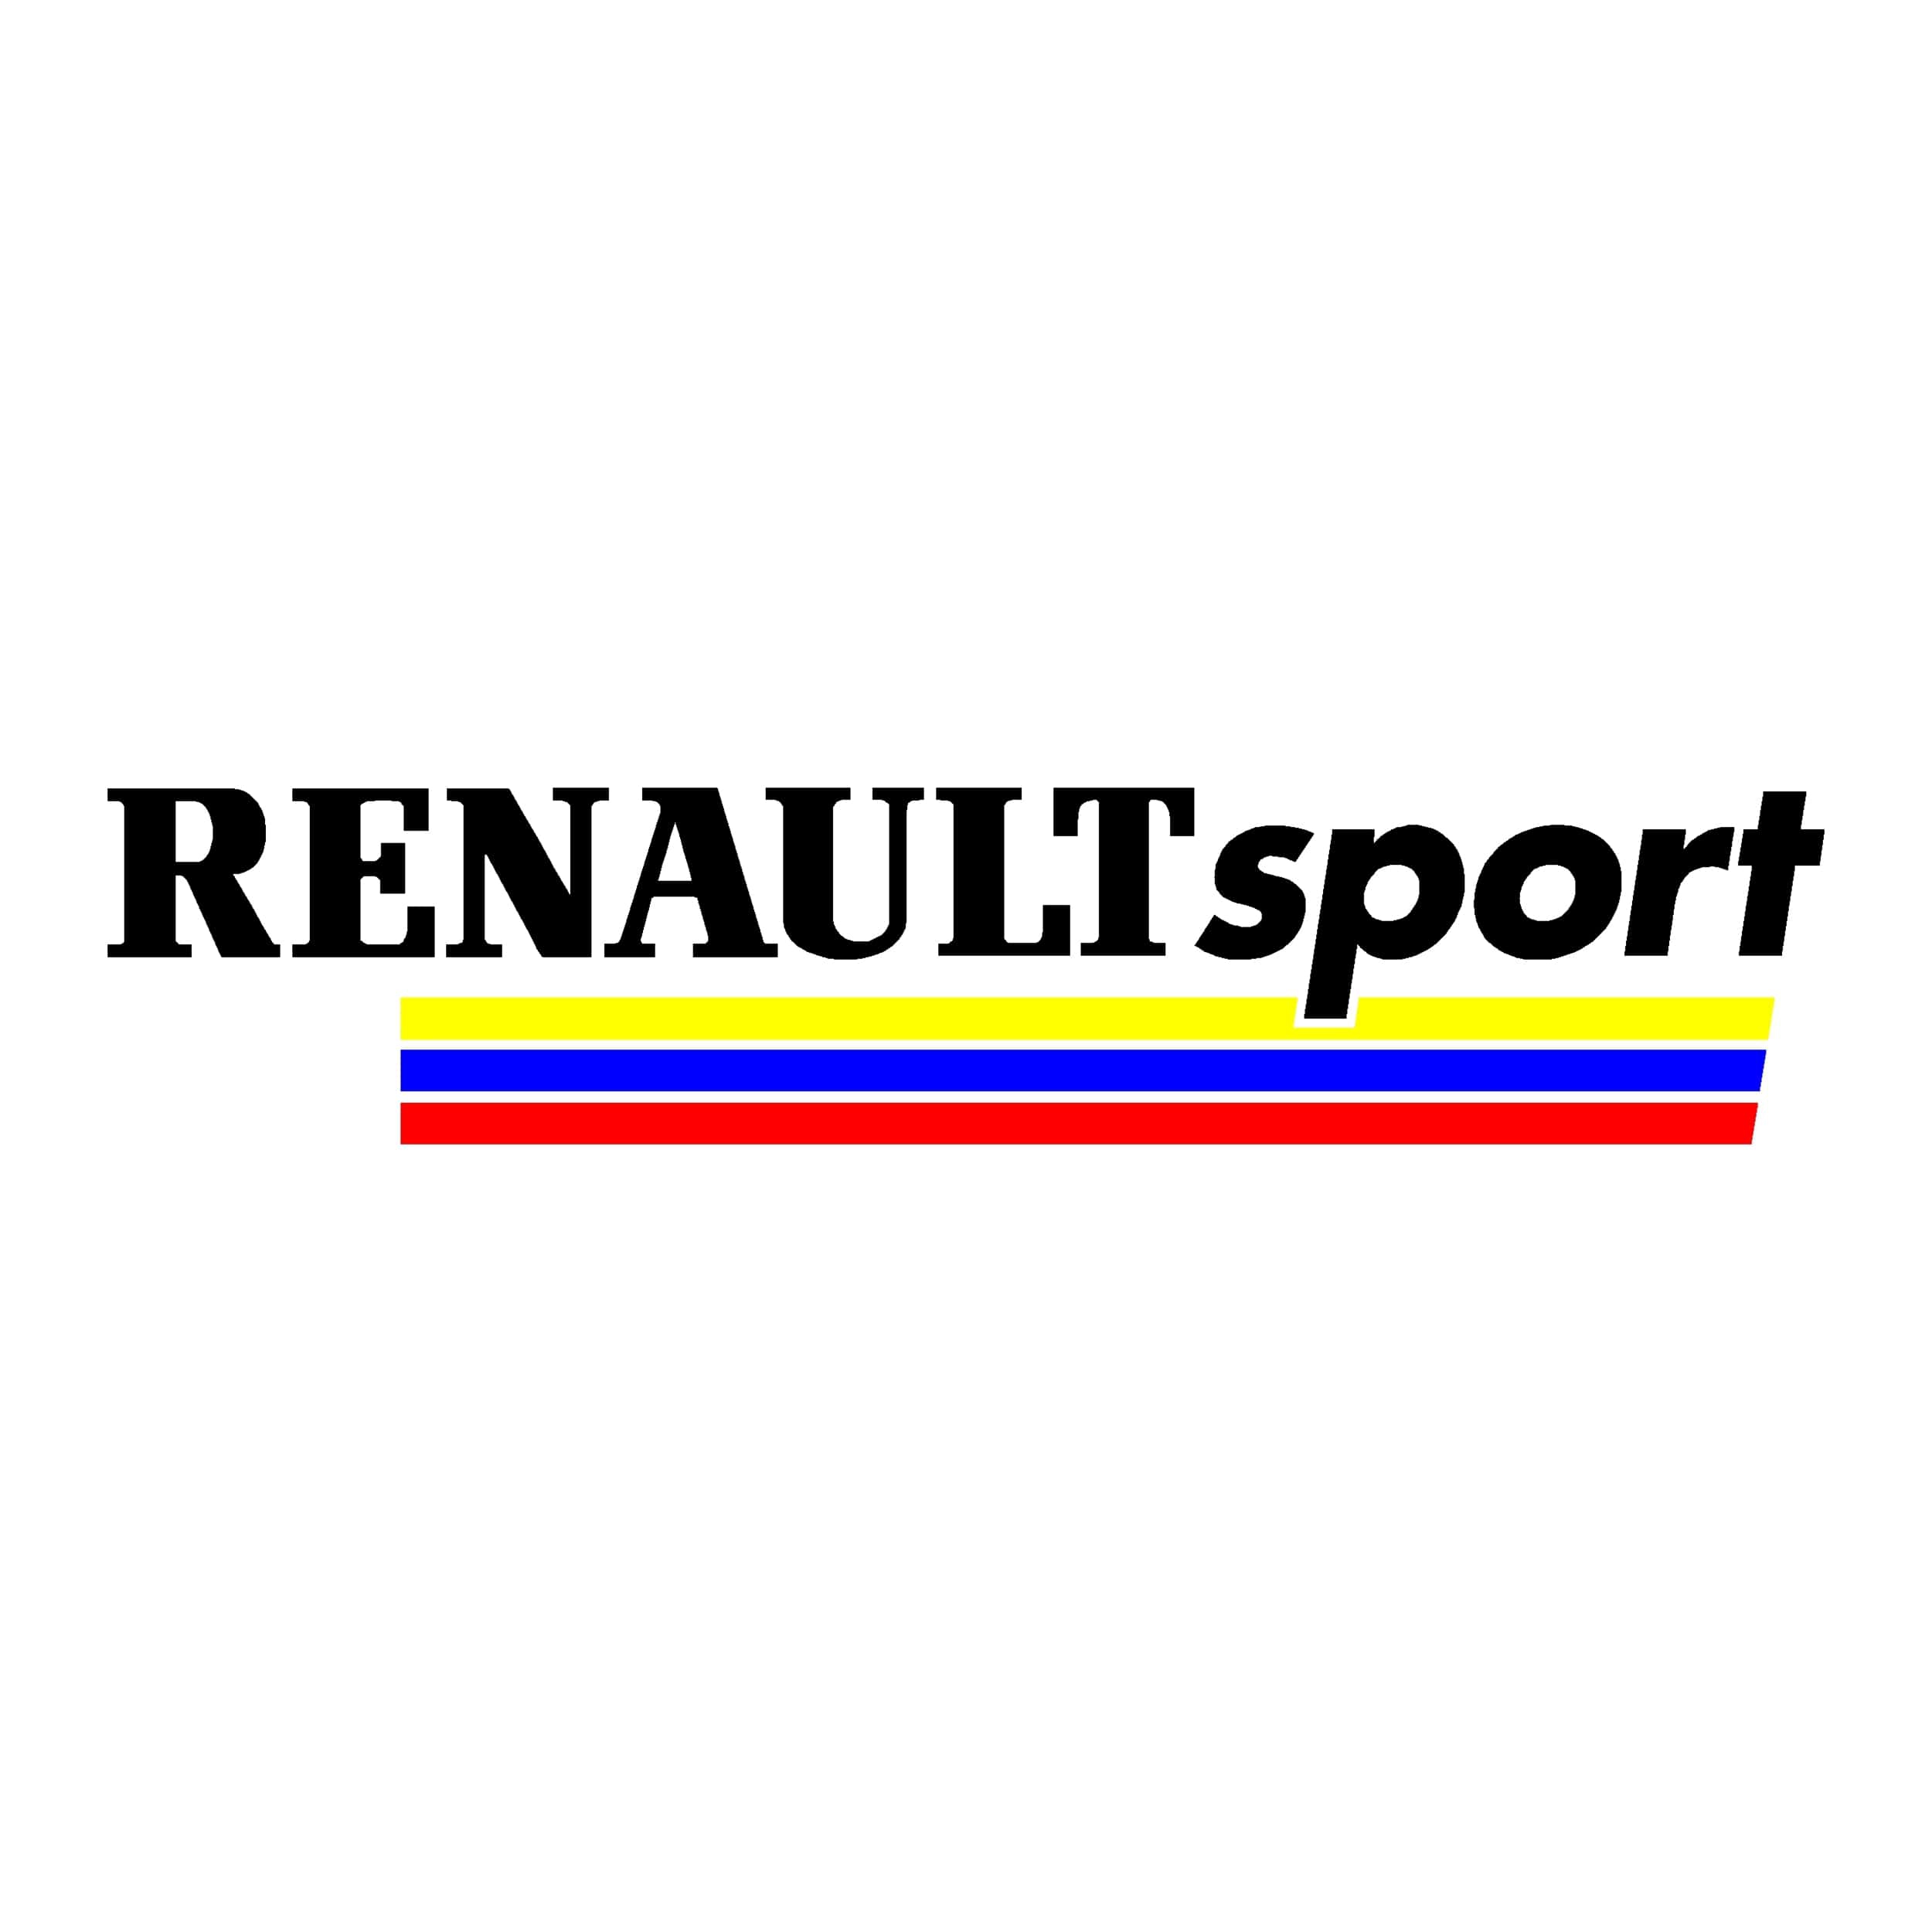 stickers-ref-63-renault-sport-logo-losange-voiture-tuning-competition-deco-adhesive-auto-racing-rallye-min